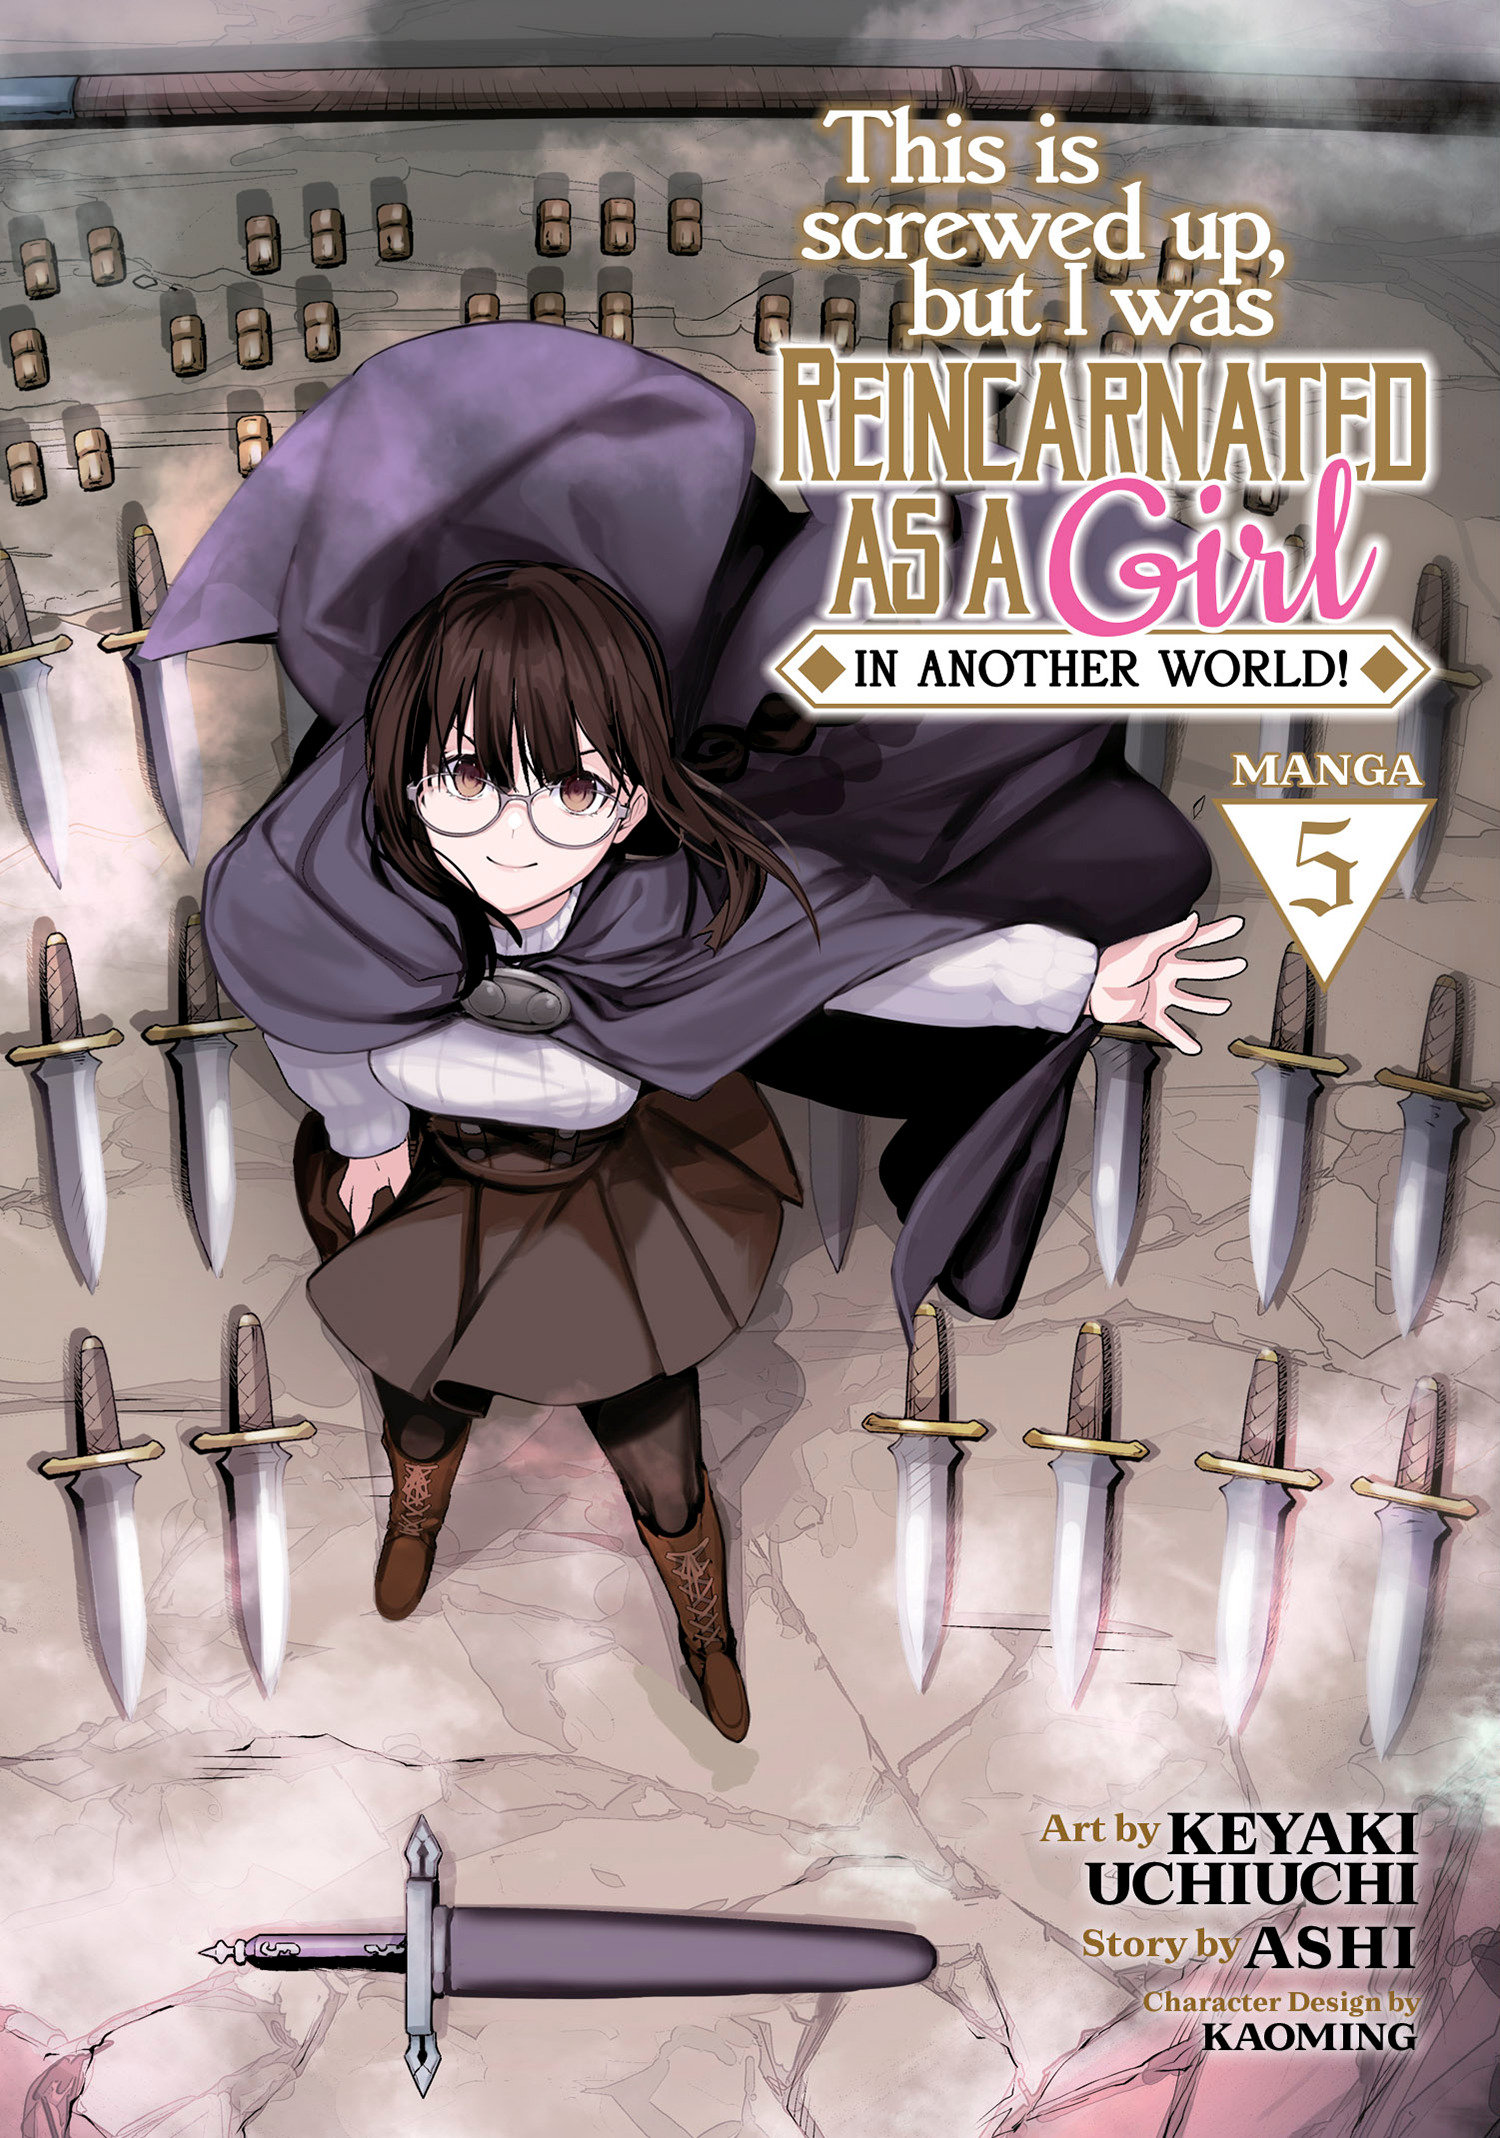 This is Screwed Up, But I Was Reincarnated as a Girl in Another World! Manga Volume 5